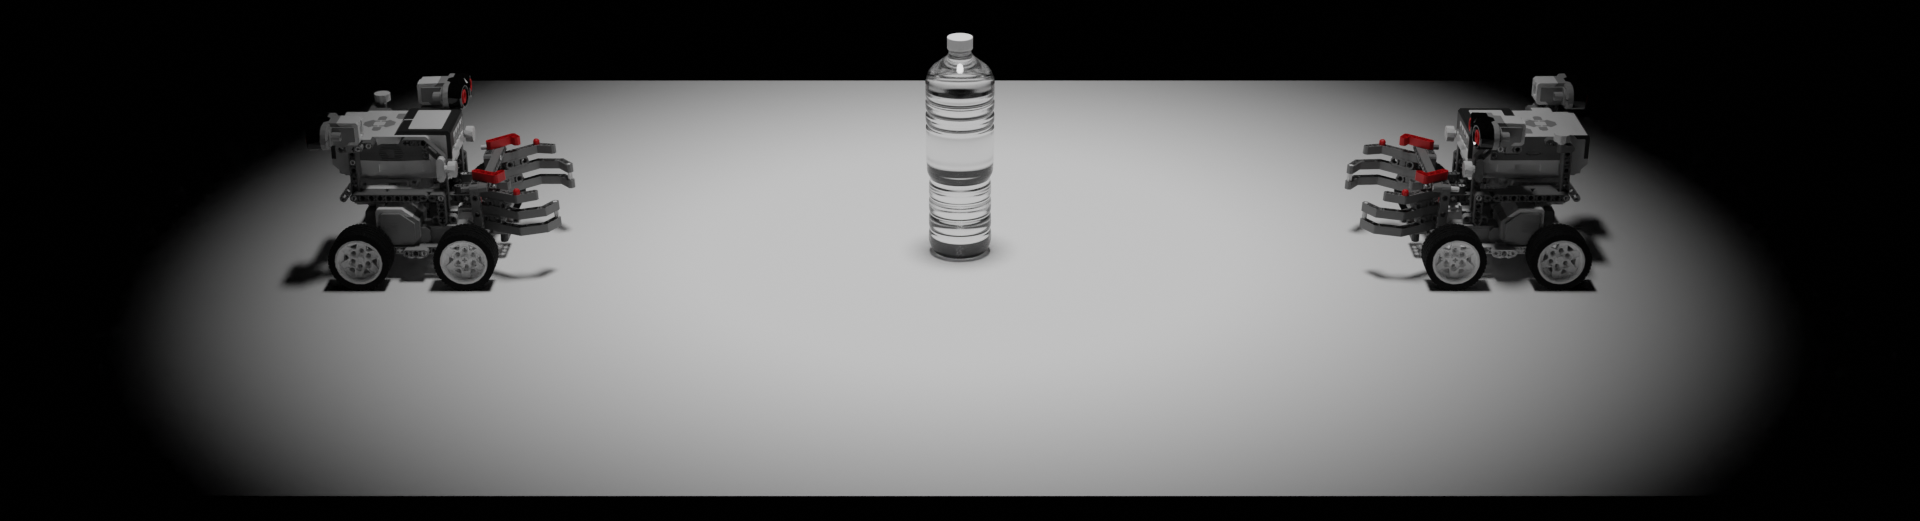 Rendering of two Lego sumo robot with a bottle in the middle.